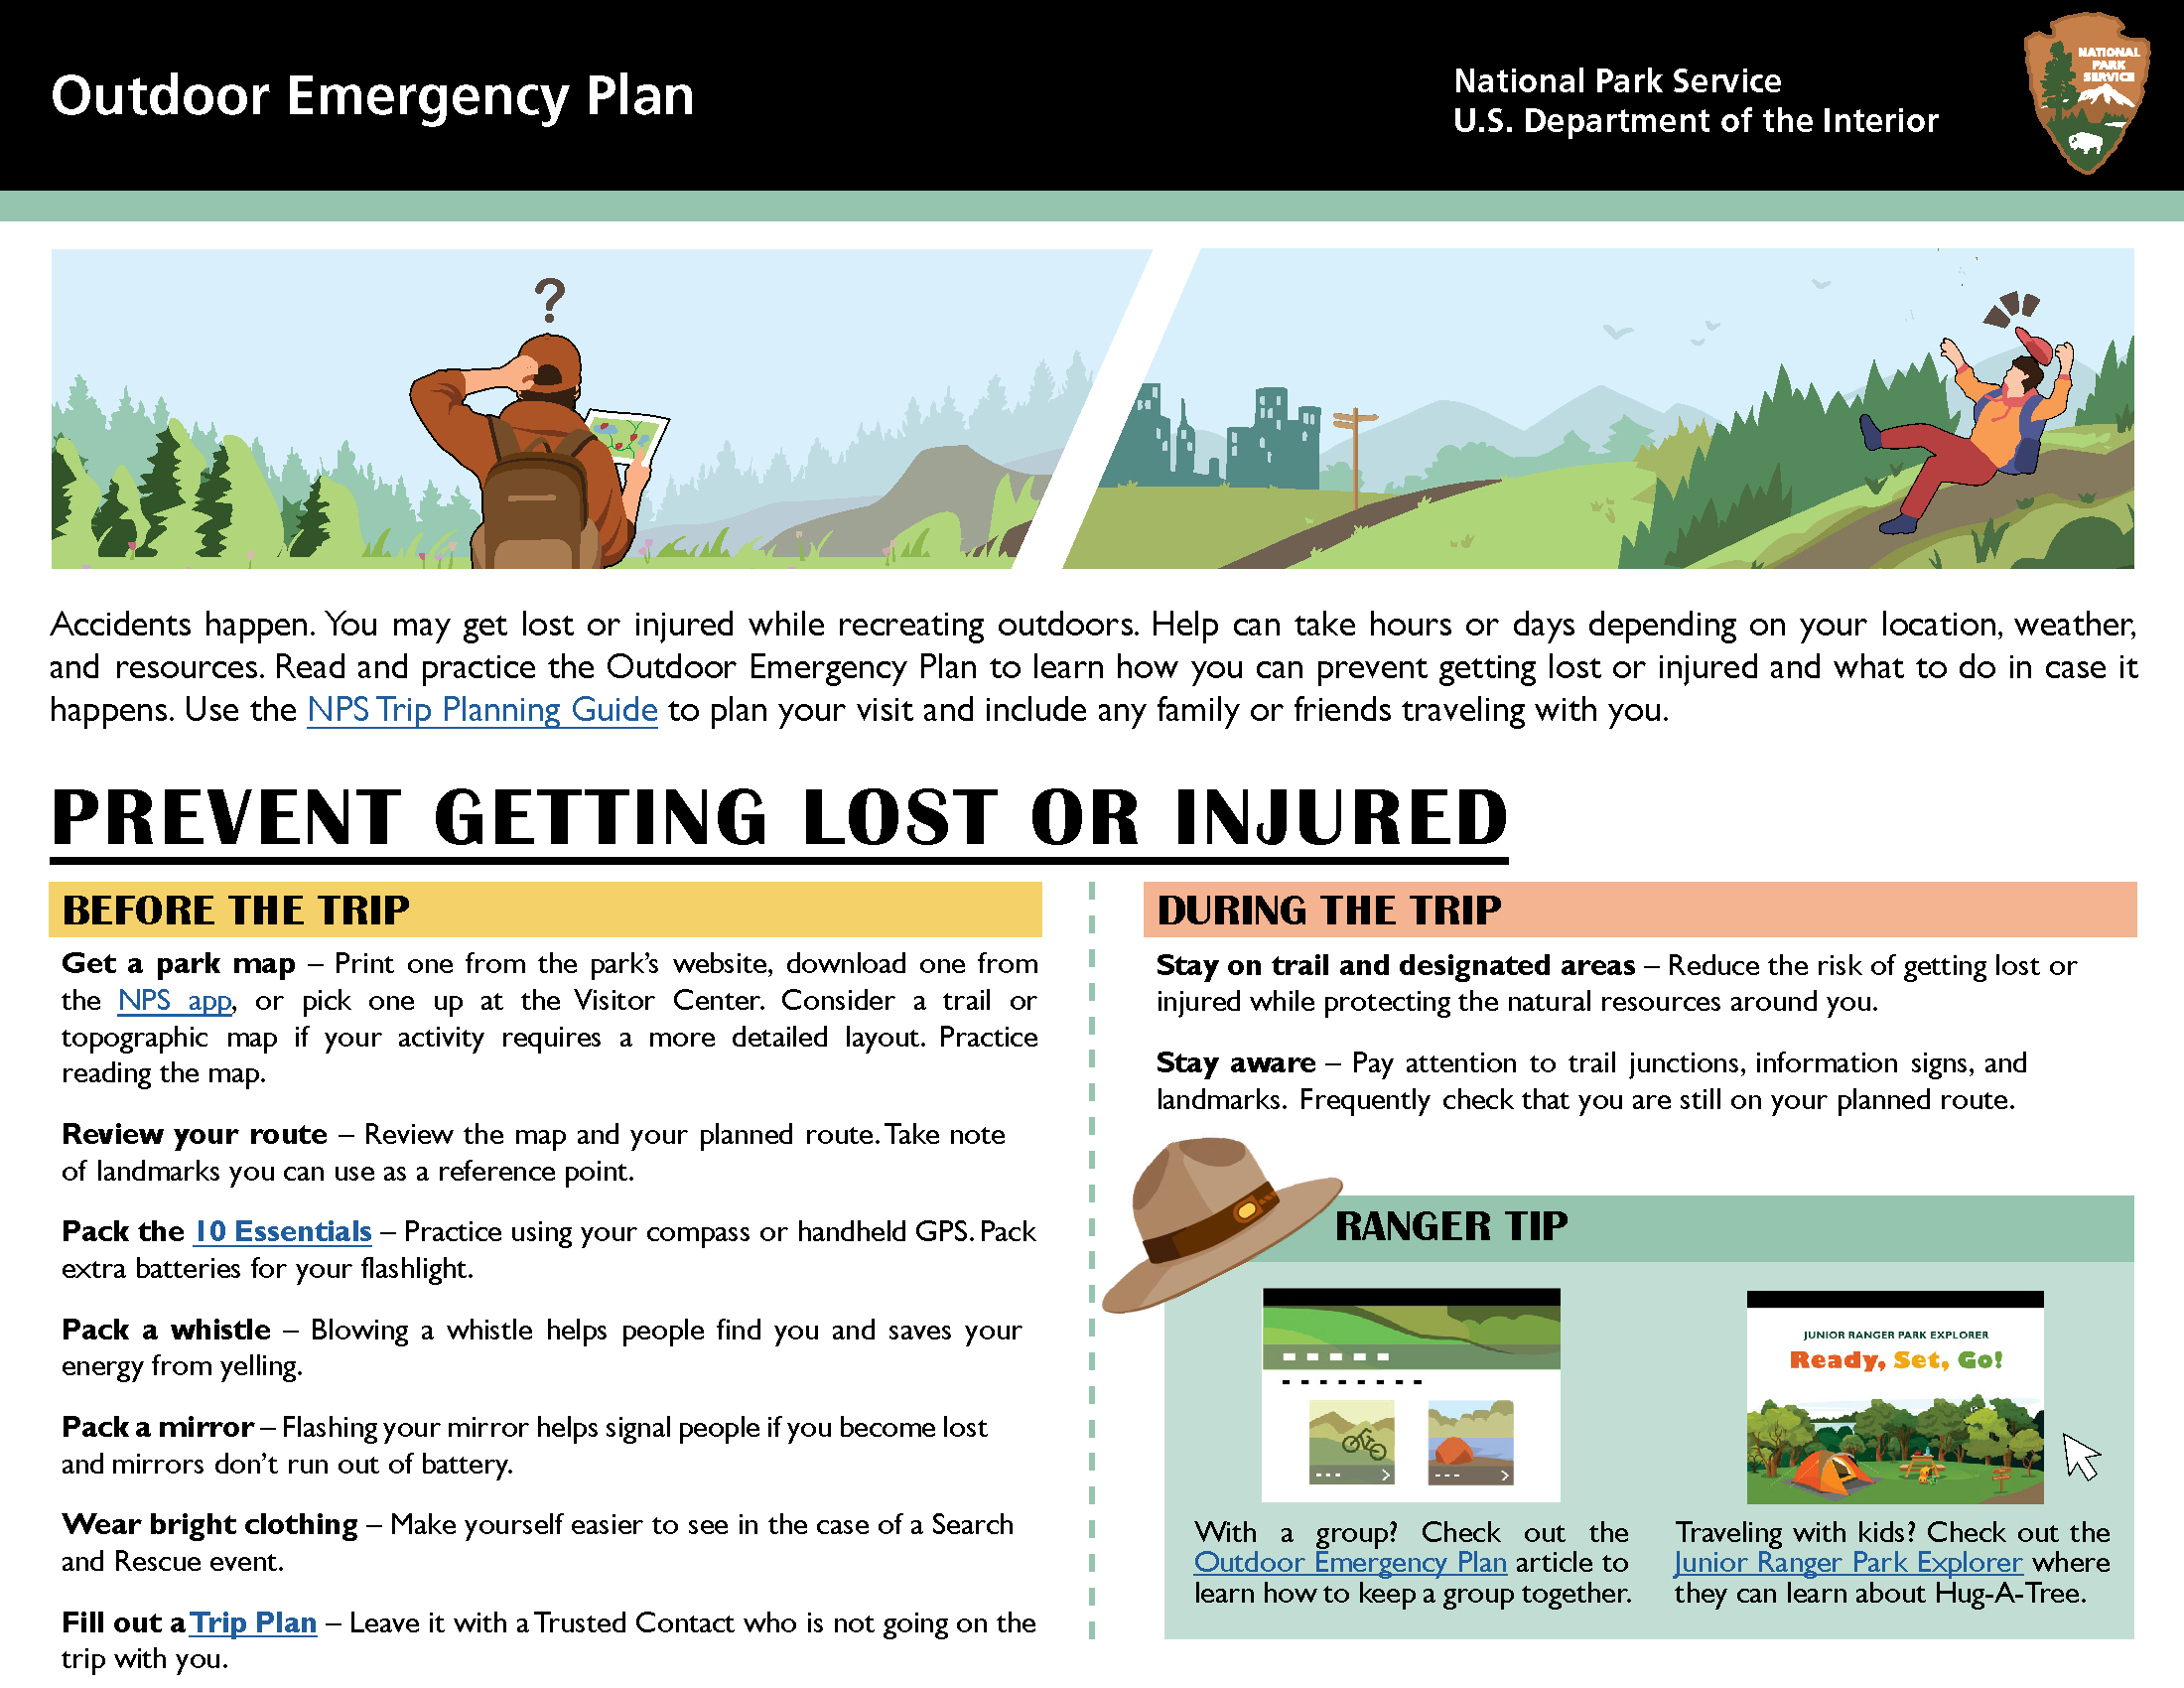 10 Basic Fire Response Procedures: Your Guide to Safety